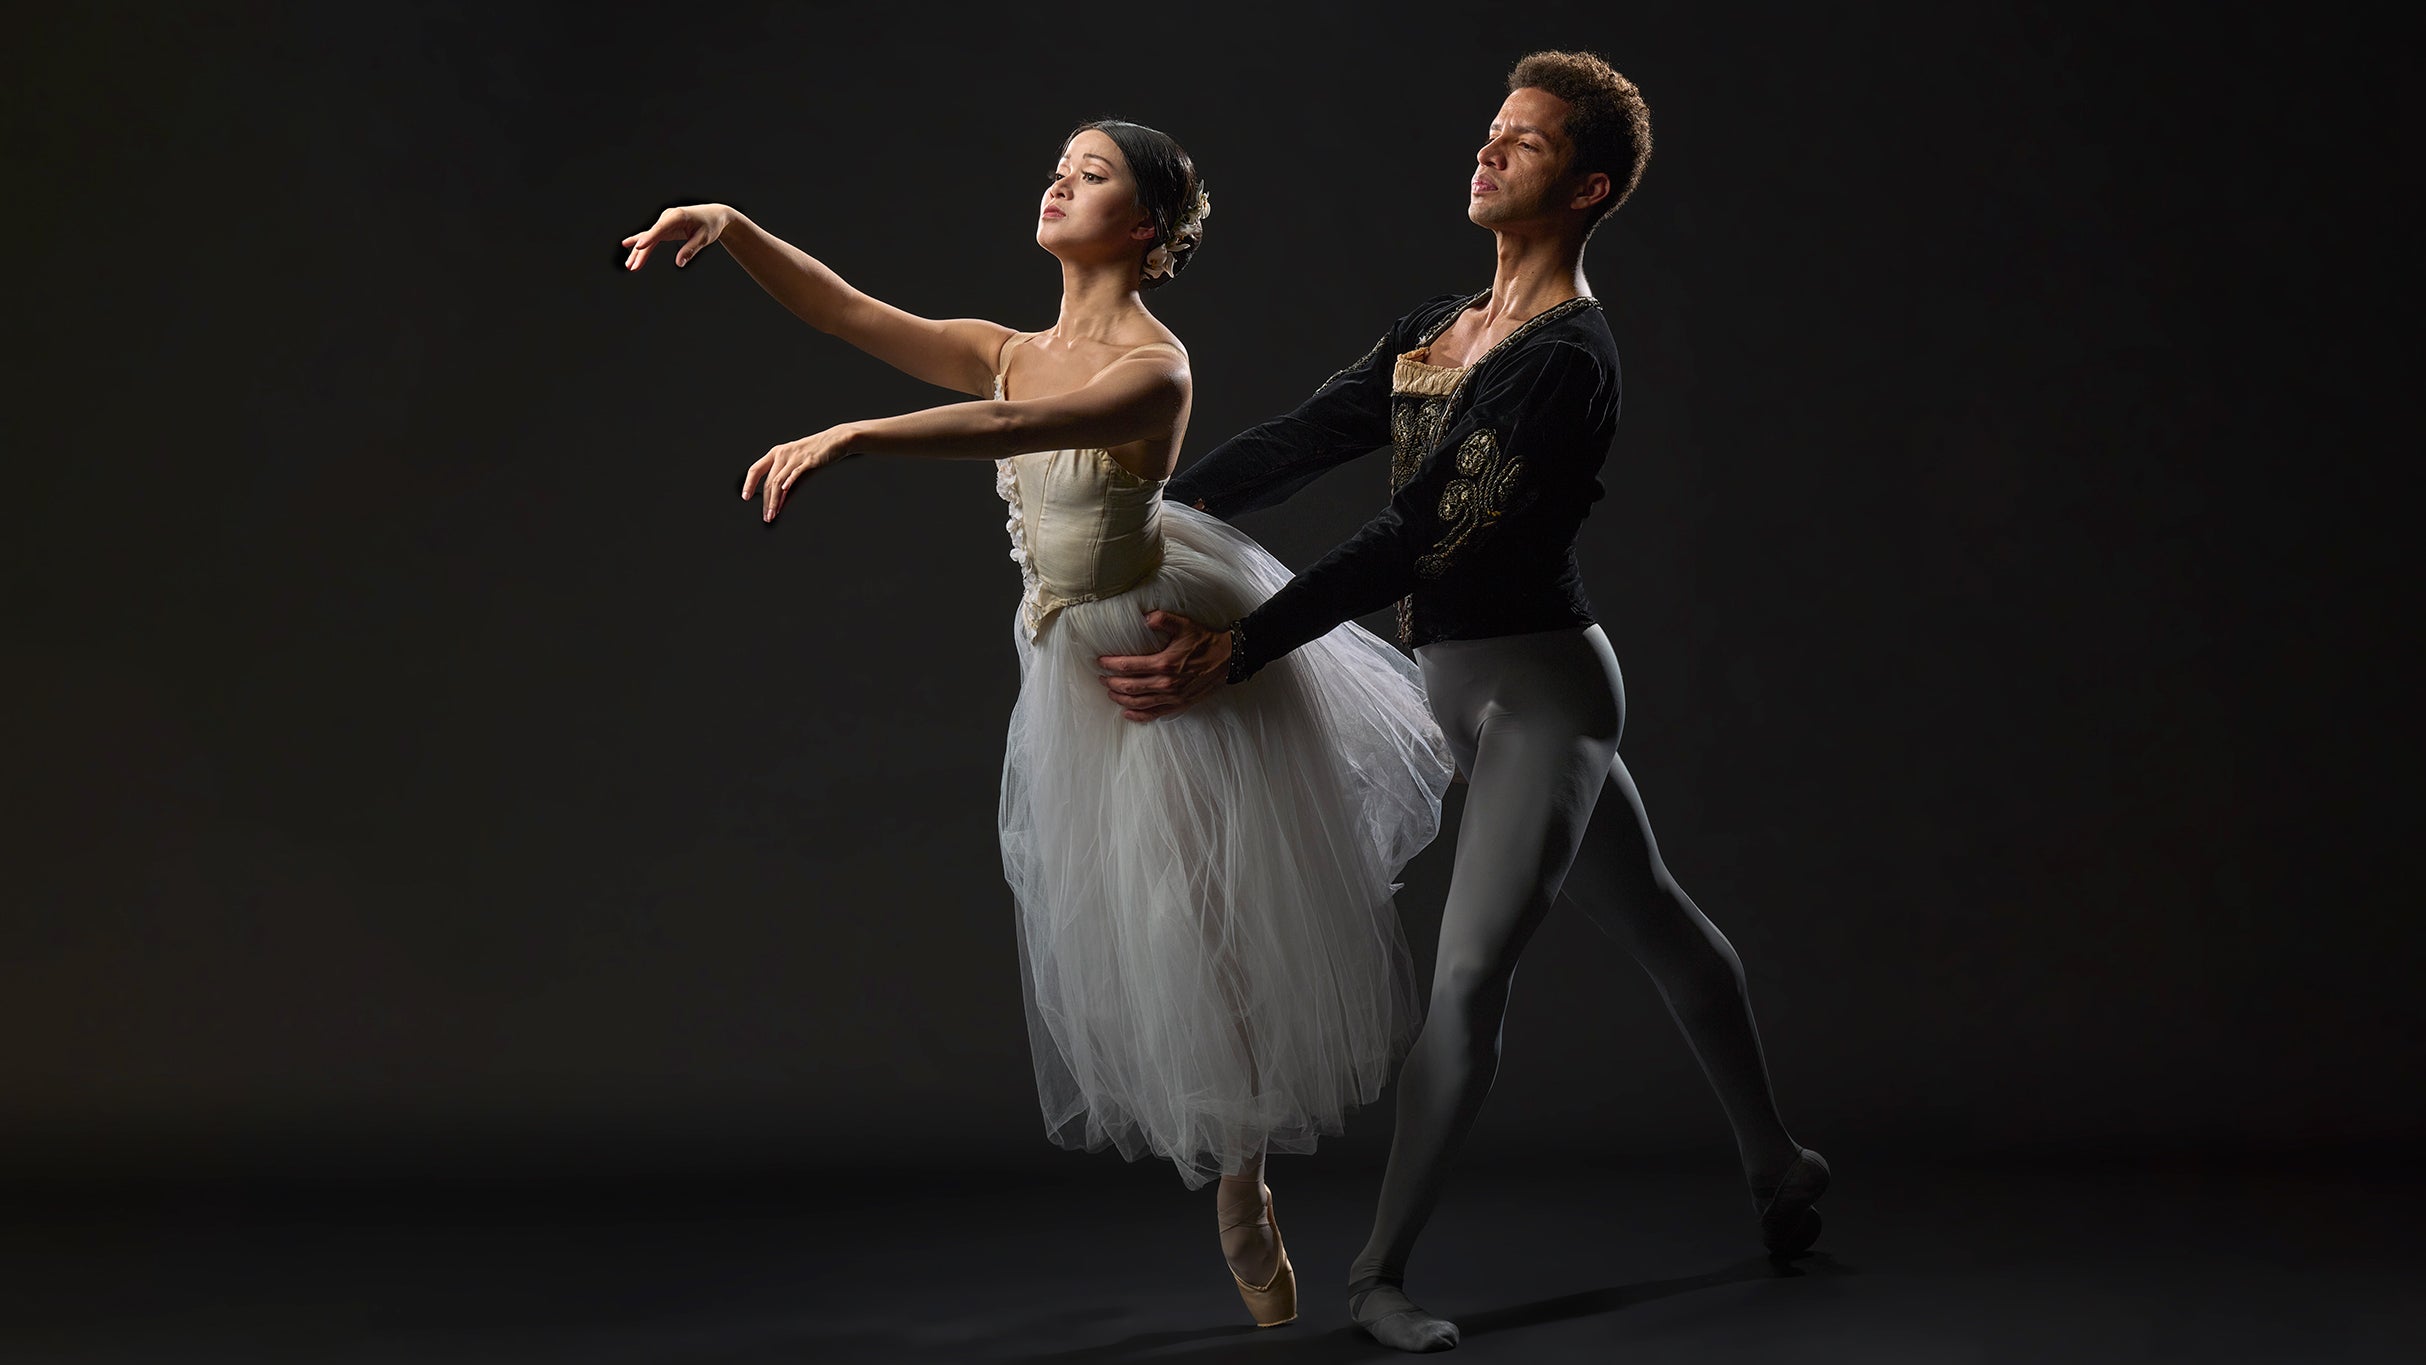 Alabama Ballet Presents Giselle with Alabama Symphony Orchestra in Birmingham event information